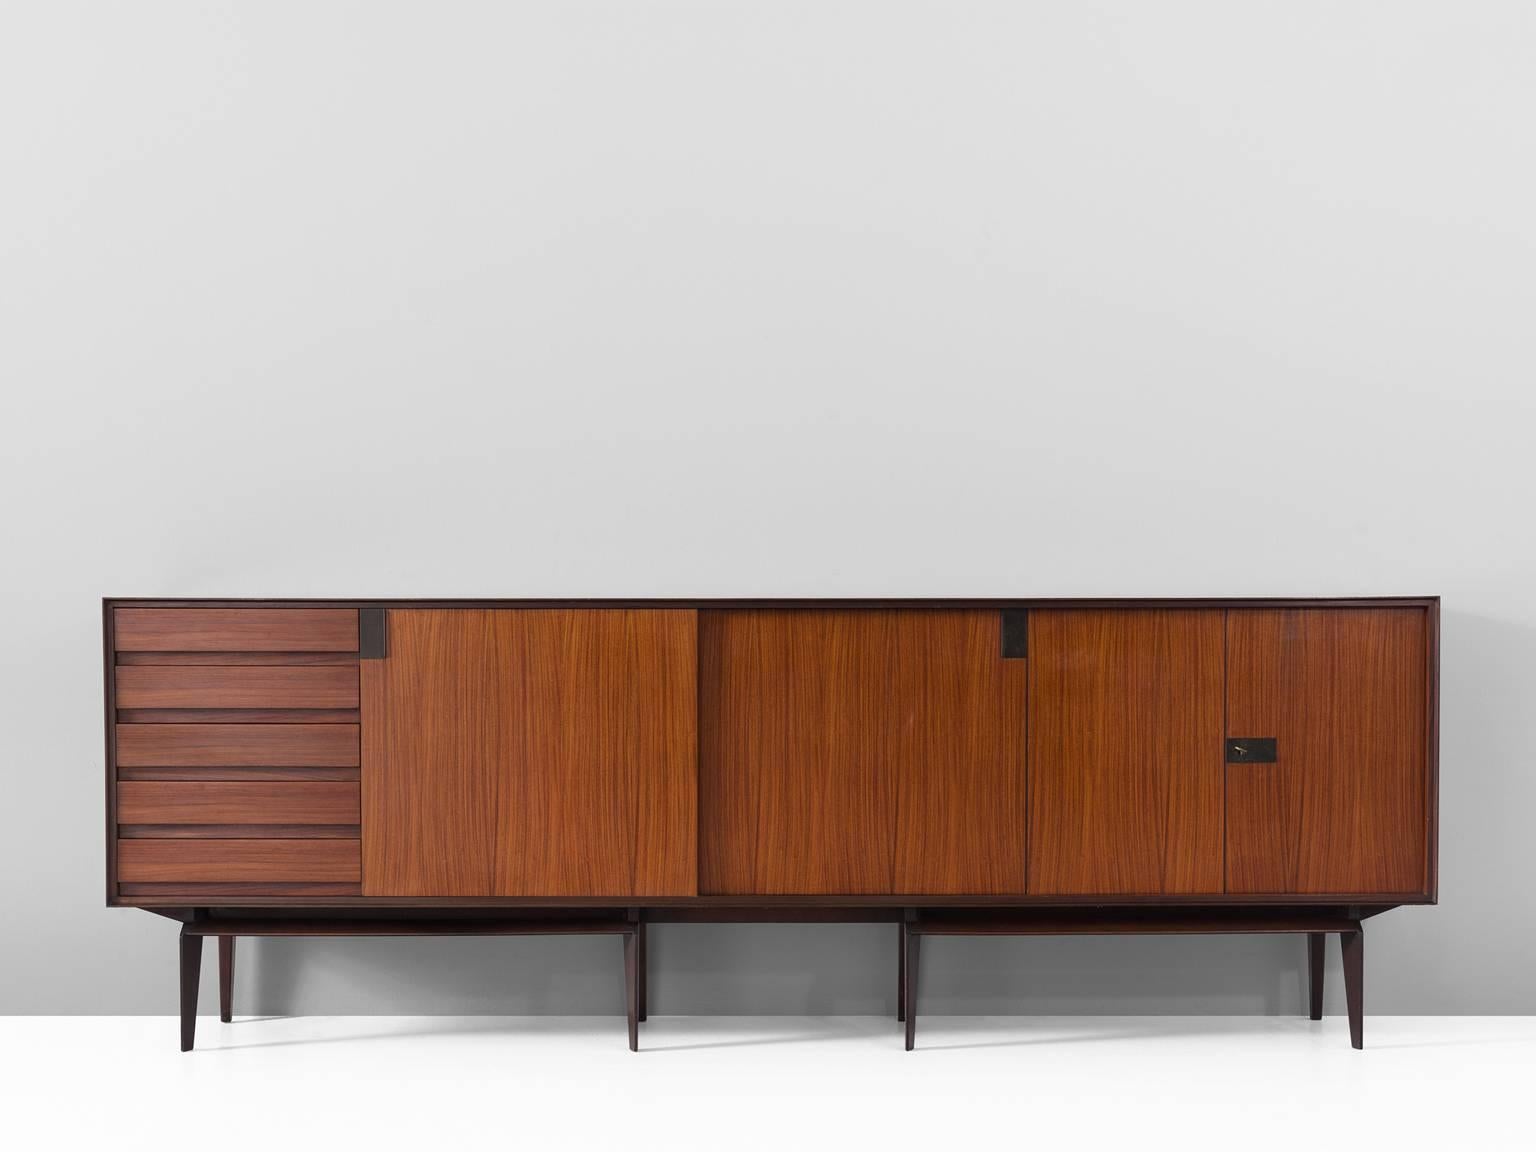 Sideboard, in rosewood and brass, by Vittorio Dassi for Palutari, Italy, 1950s. 

Highly rare large Italian sideboard by Vittorio Dassi. The credenza shows magnificent craftsmanship and well-designed proportions and details. Its length is quite